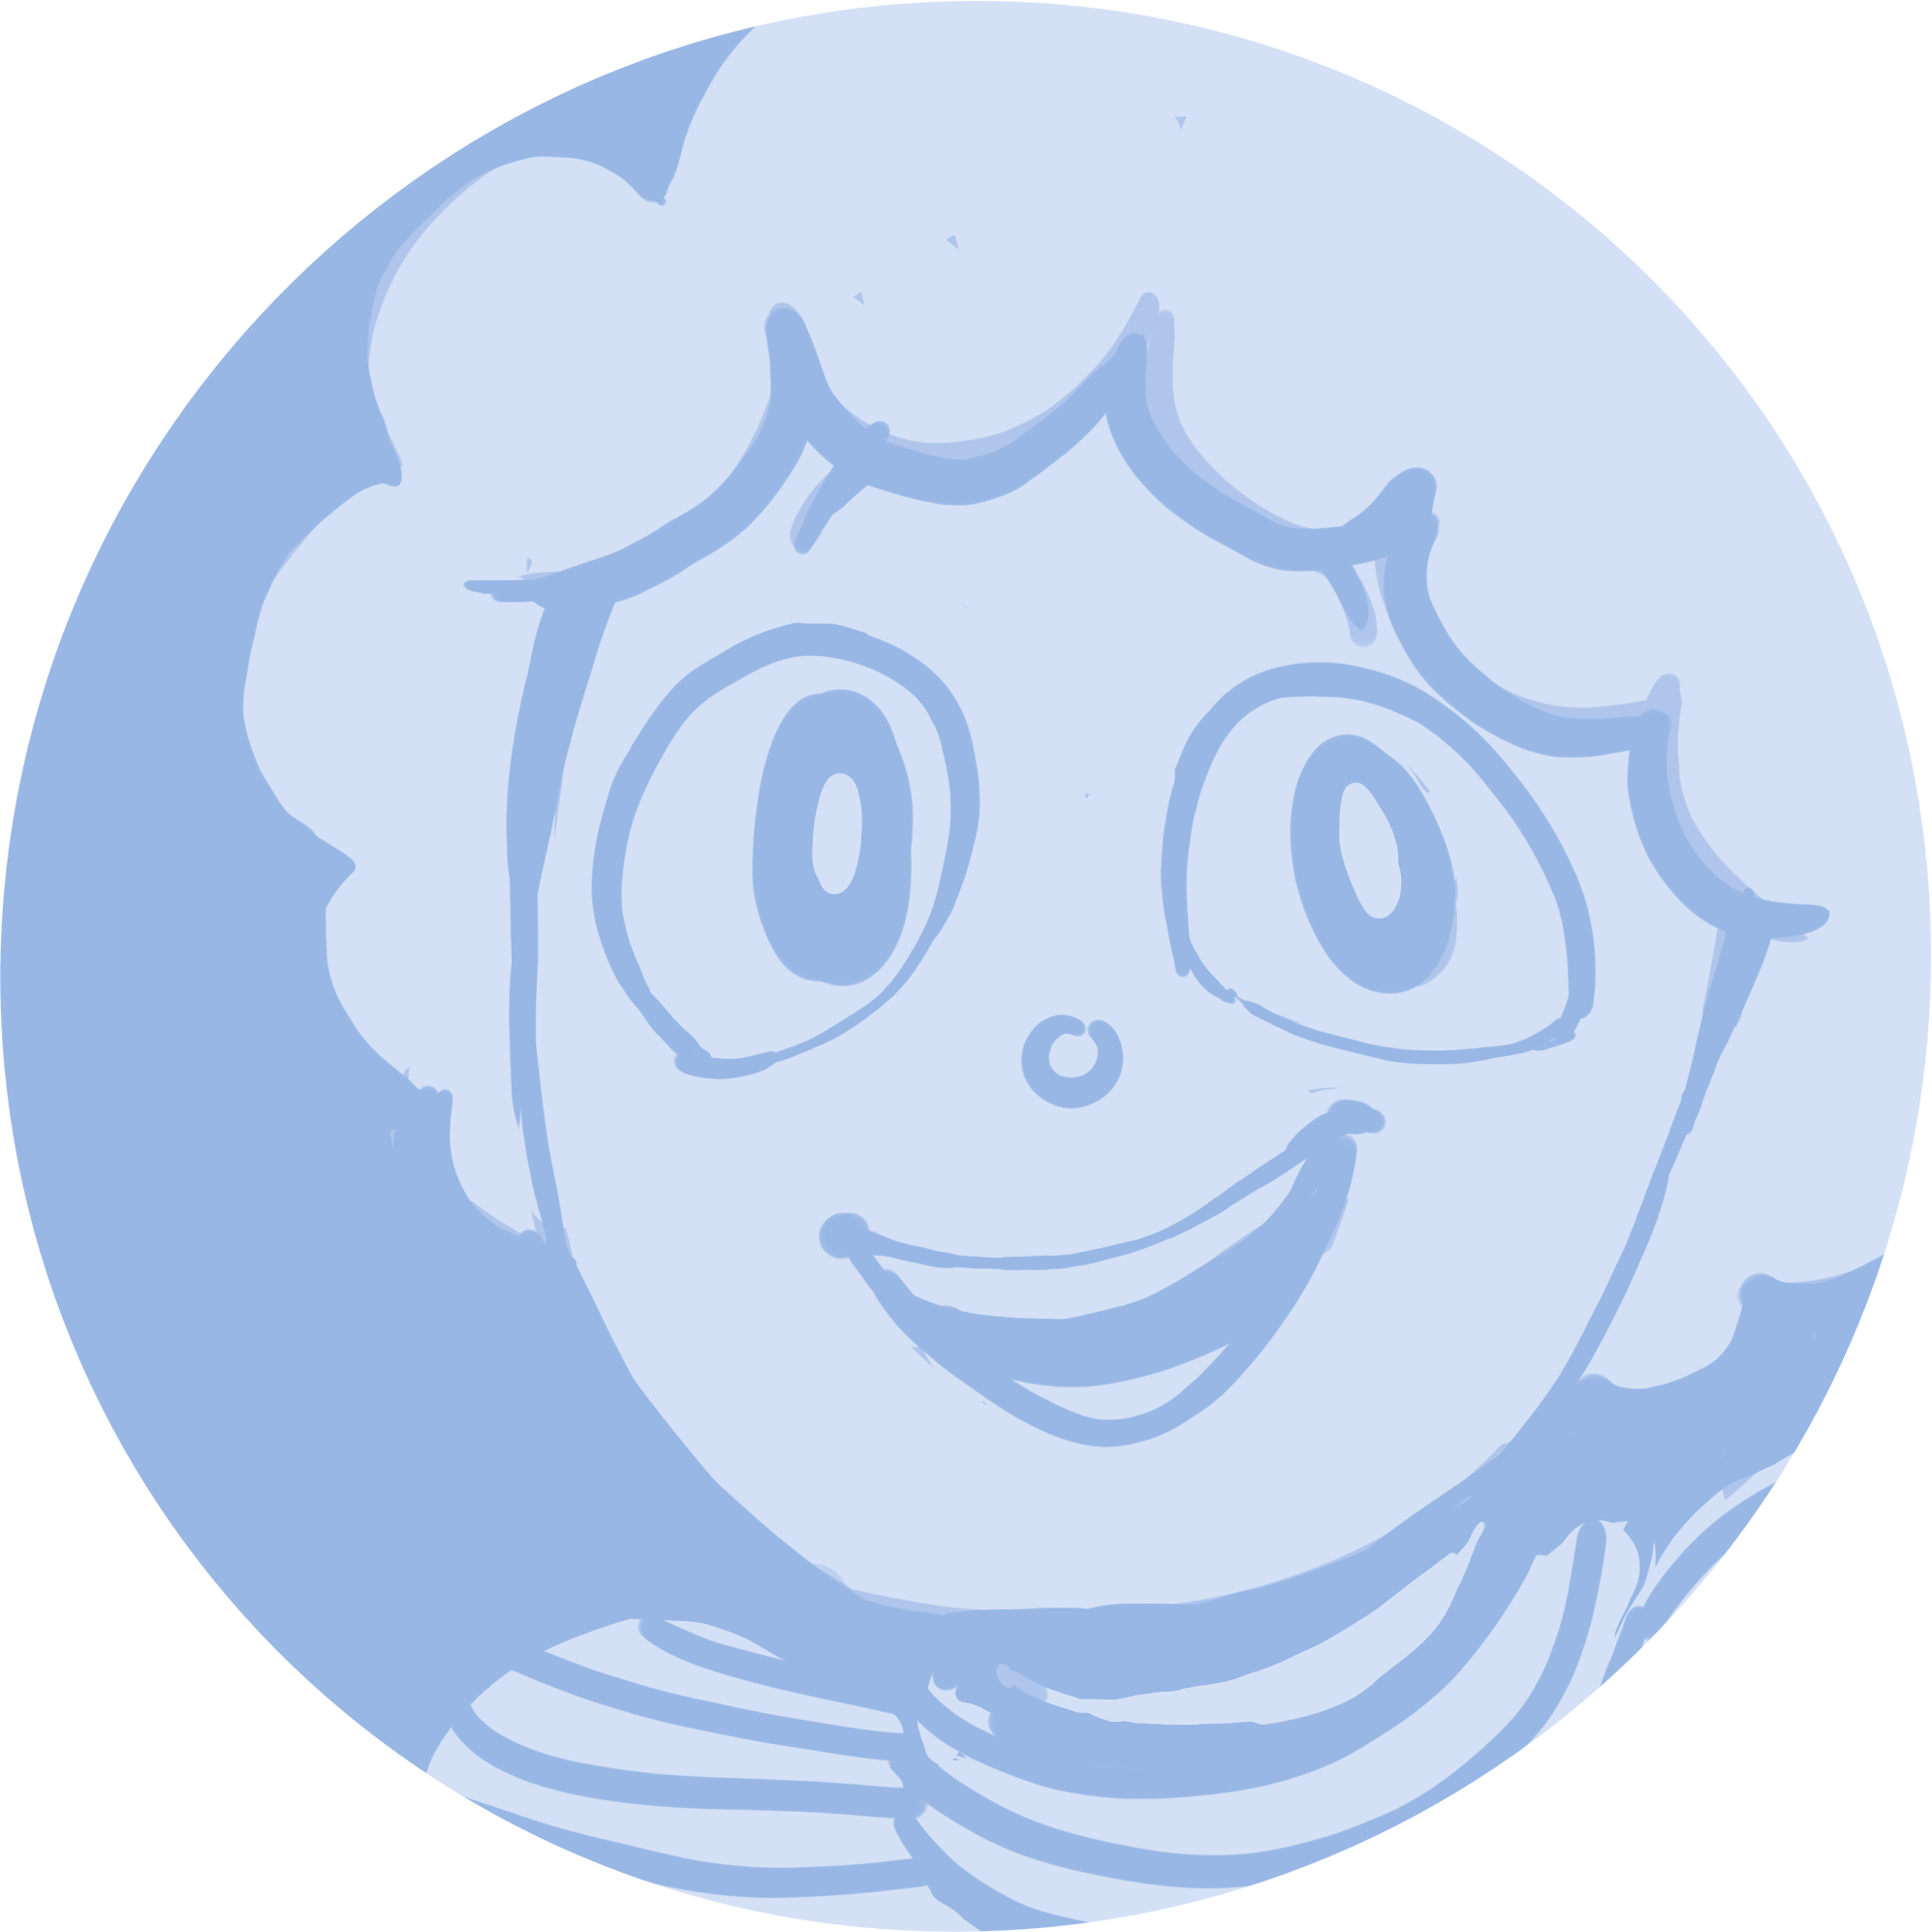 Image of Mr. Blue. He has poofy hair, a circle nose, and horizontal oval blue eyes.